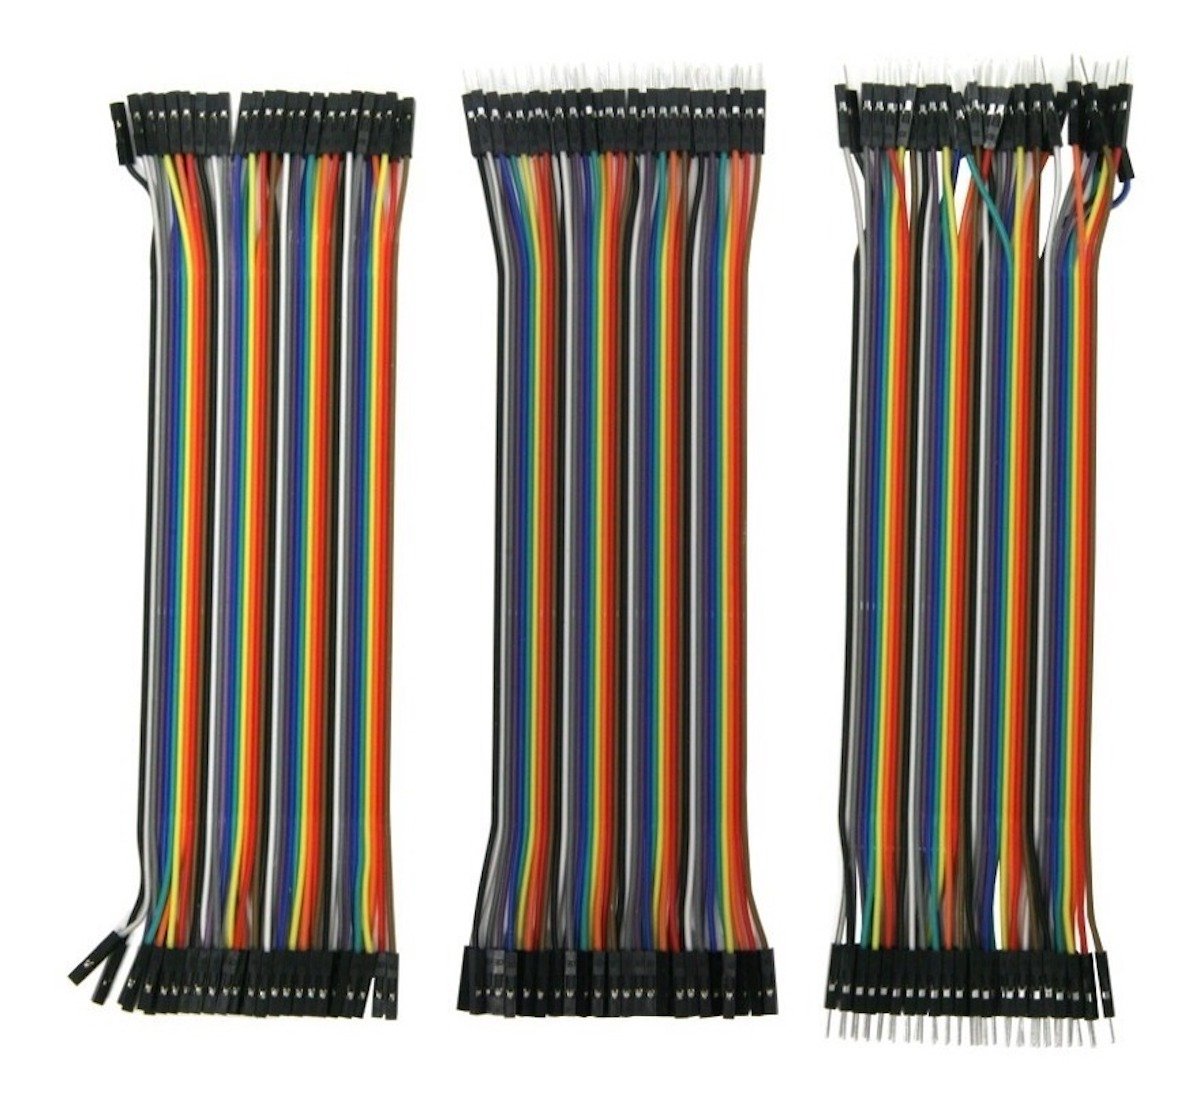 CABLE DUPONT JUMPER HEMBRA-HEMBRA 20CM PACK 10 UNIDADES